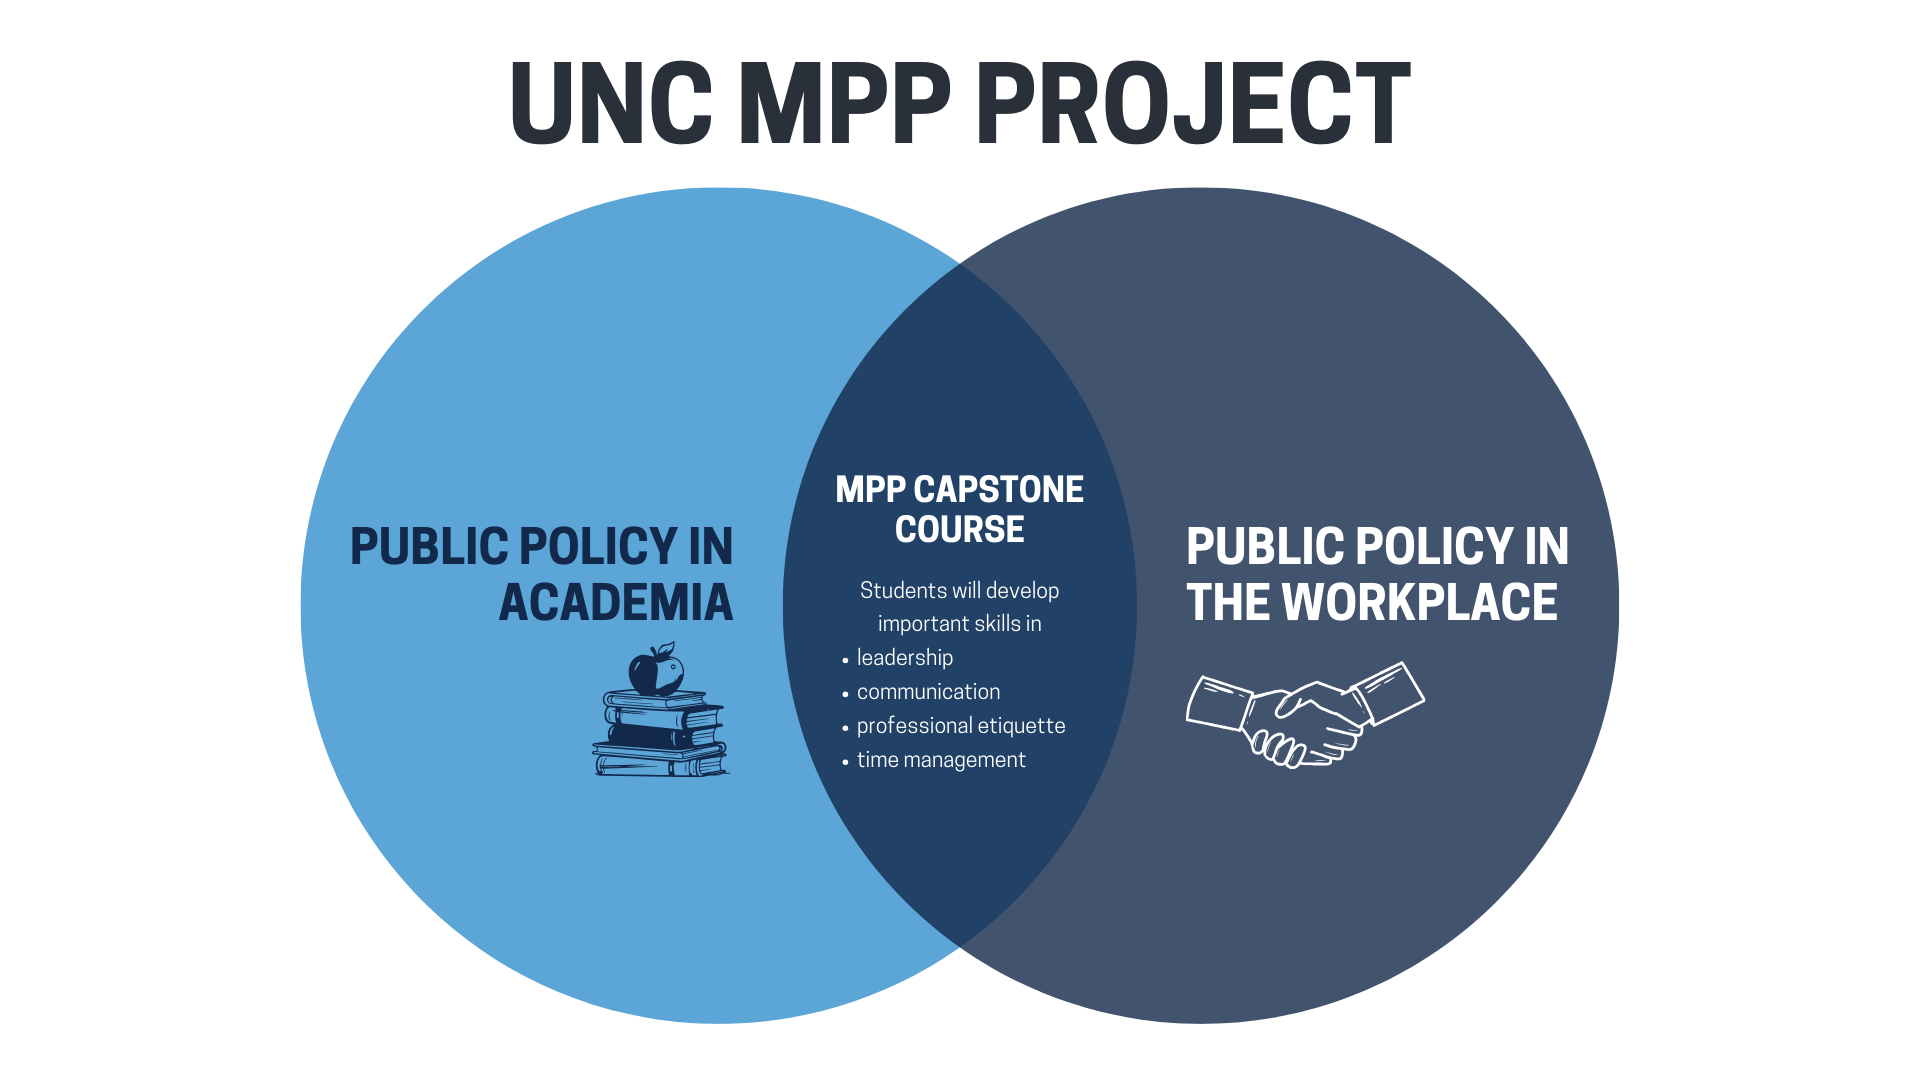 A Venn diagram showing Public Policy in Academia on the left, Public Policy in the Workplace on the right, and the MPP Capstone course in the center